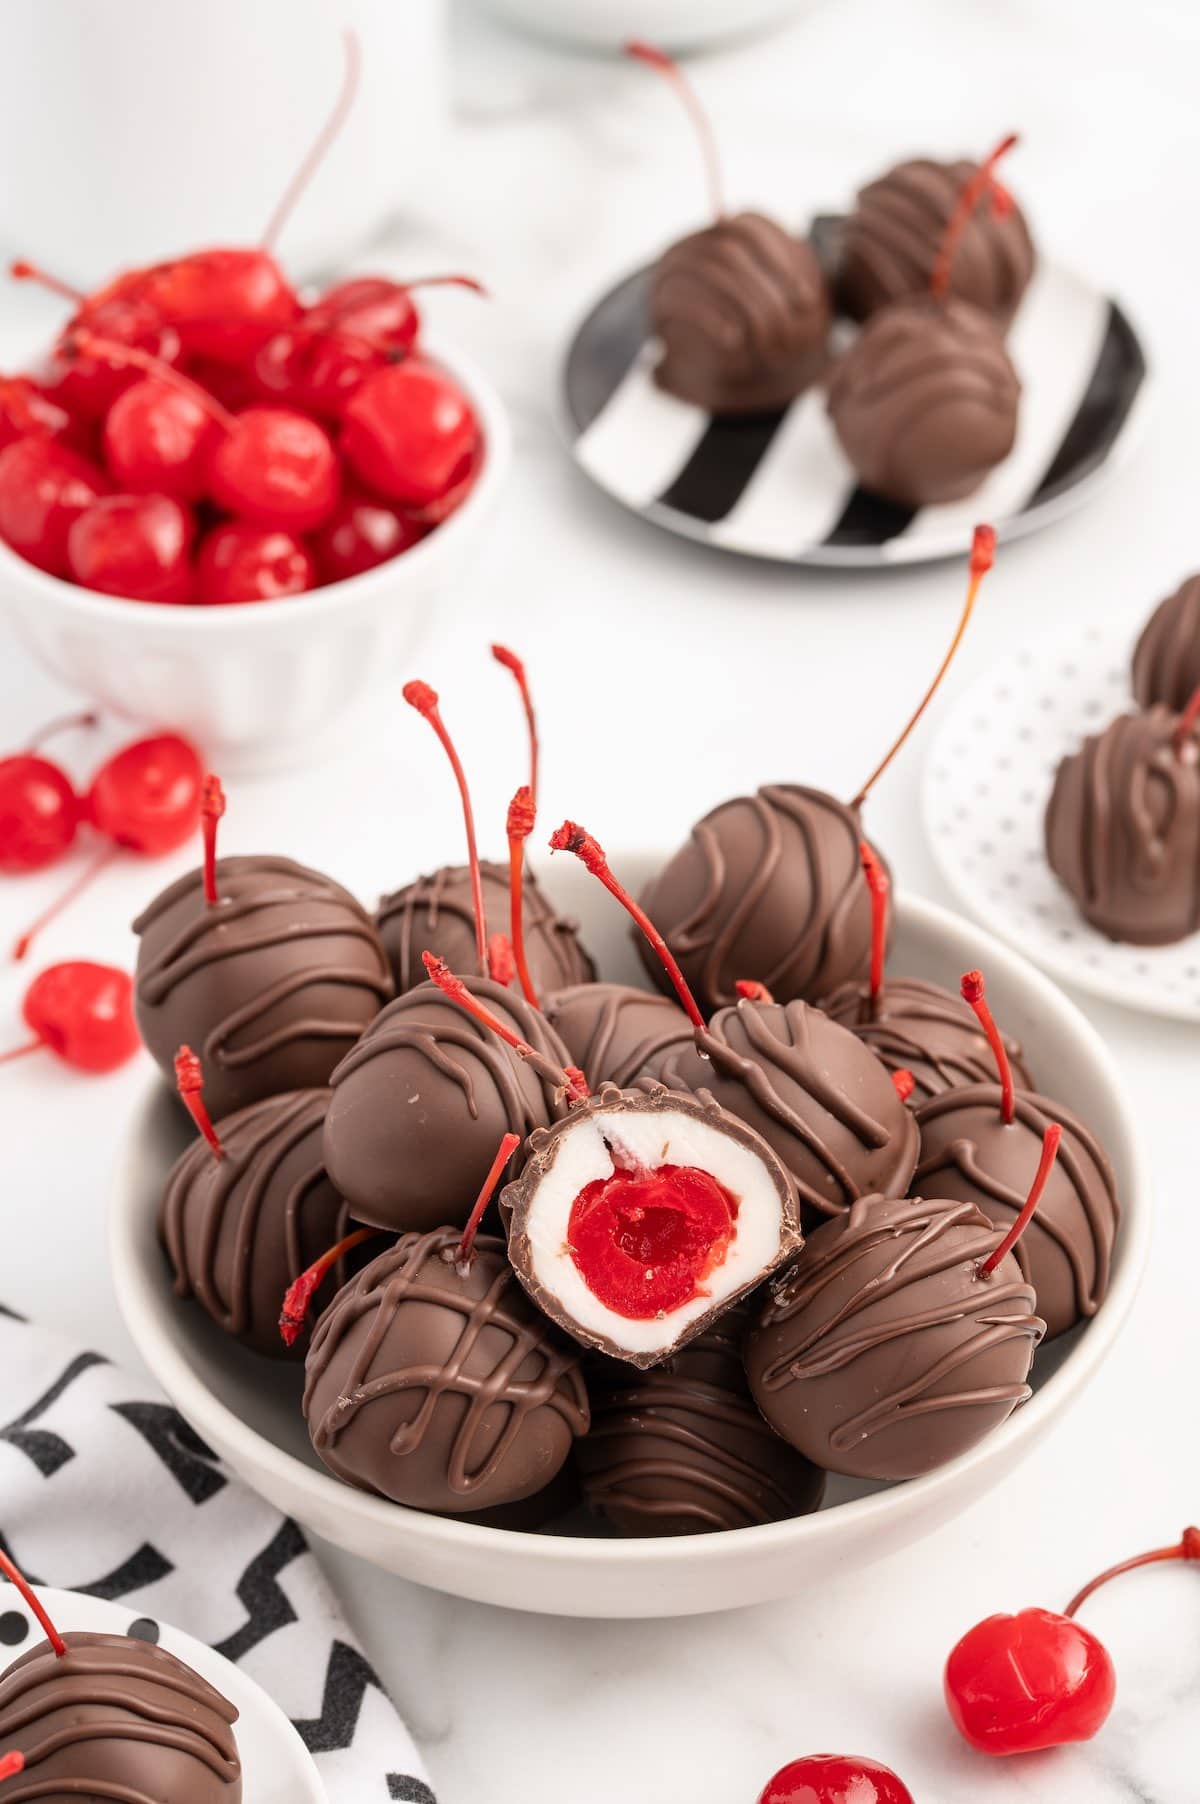 a couple of Chocolate Covered Cherries in a bowl with a bowl full of maraschino cherries on the background.